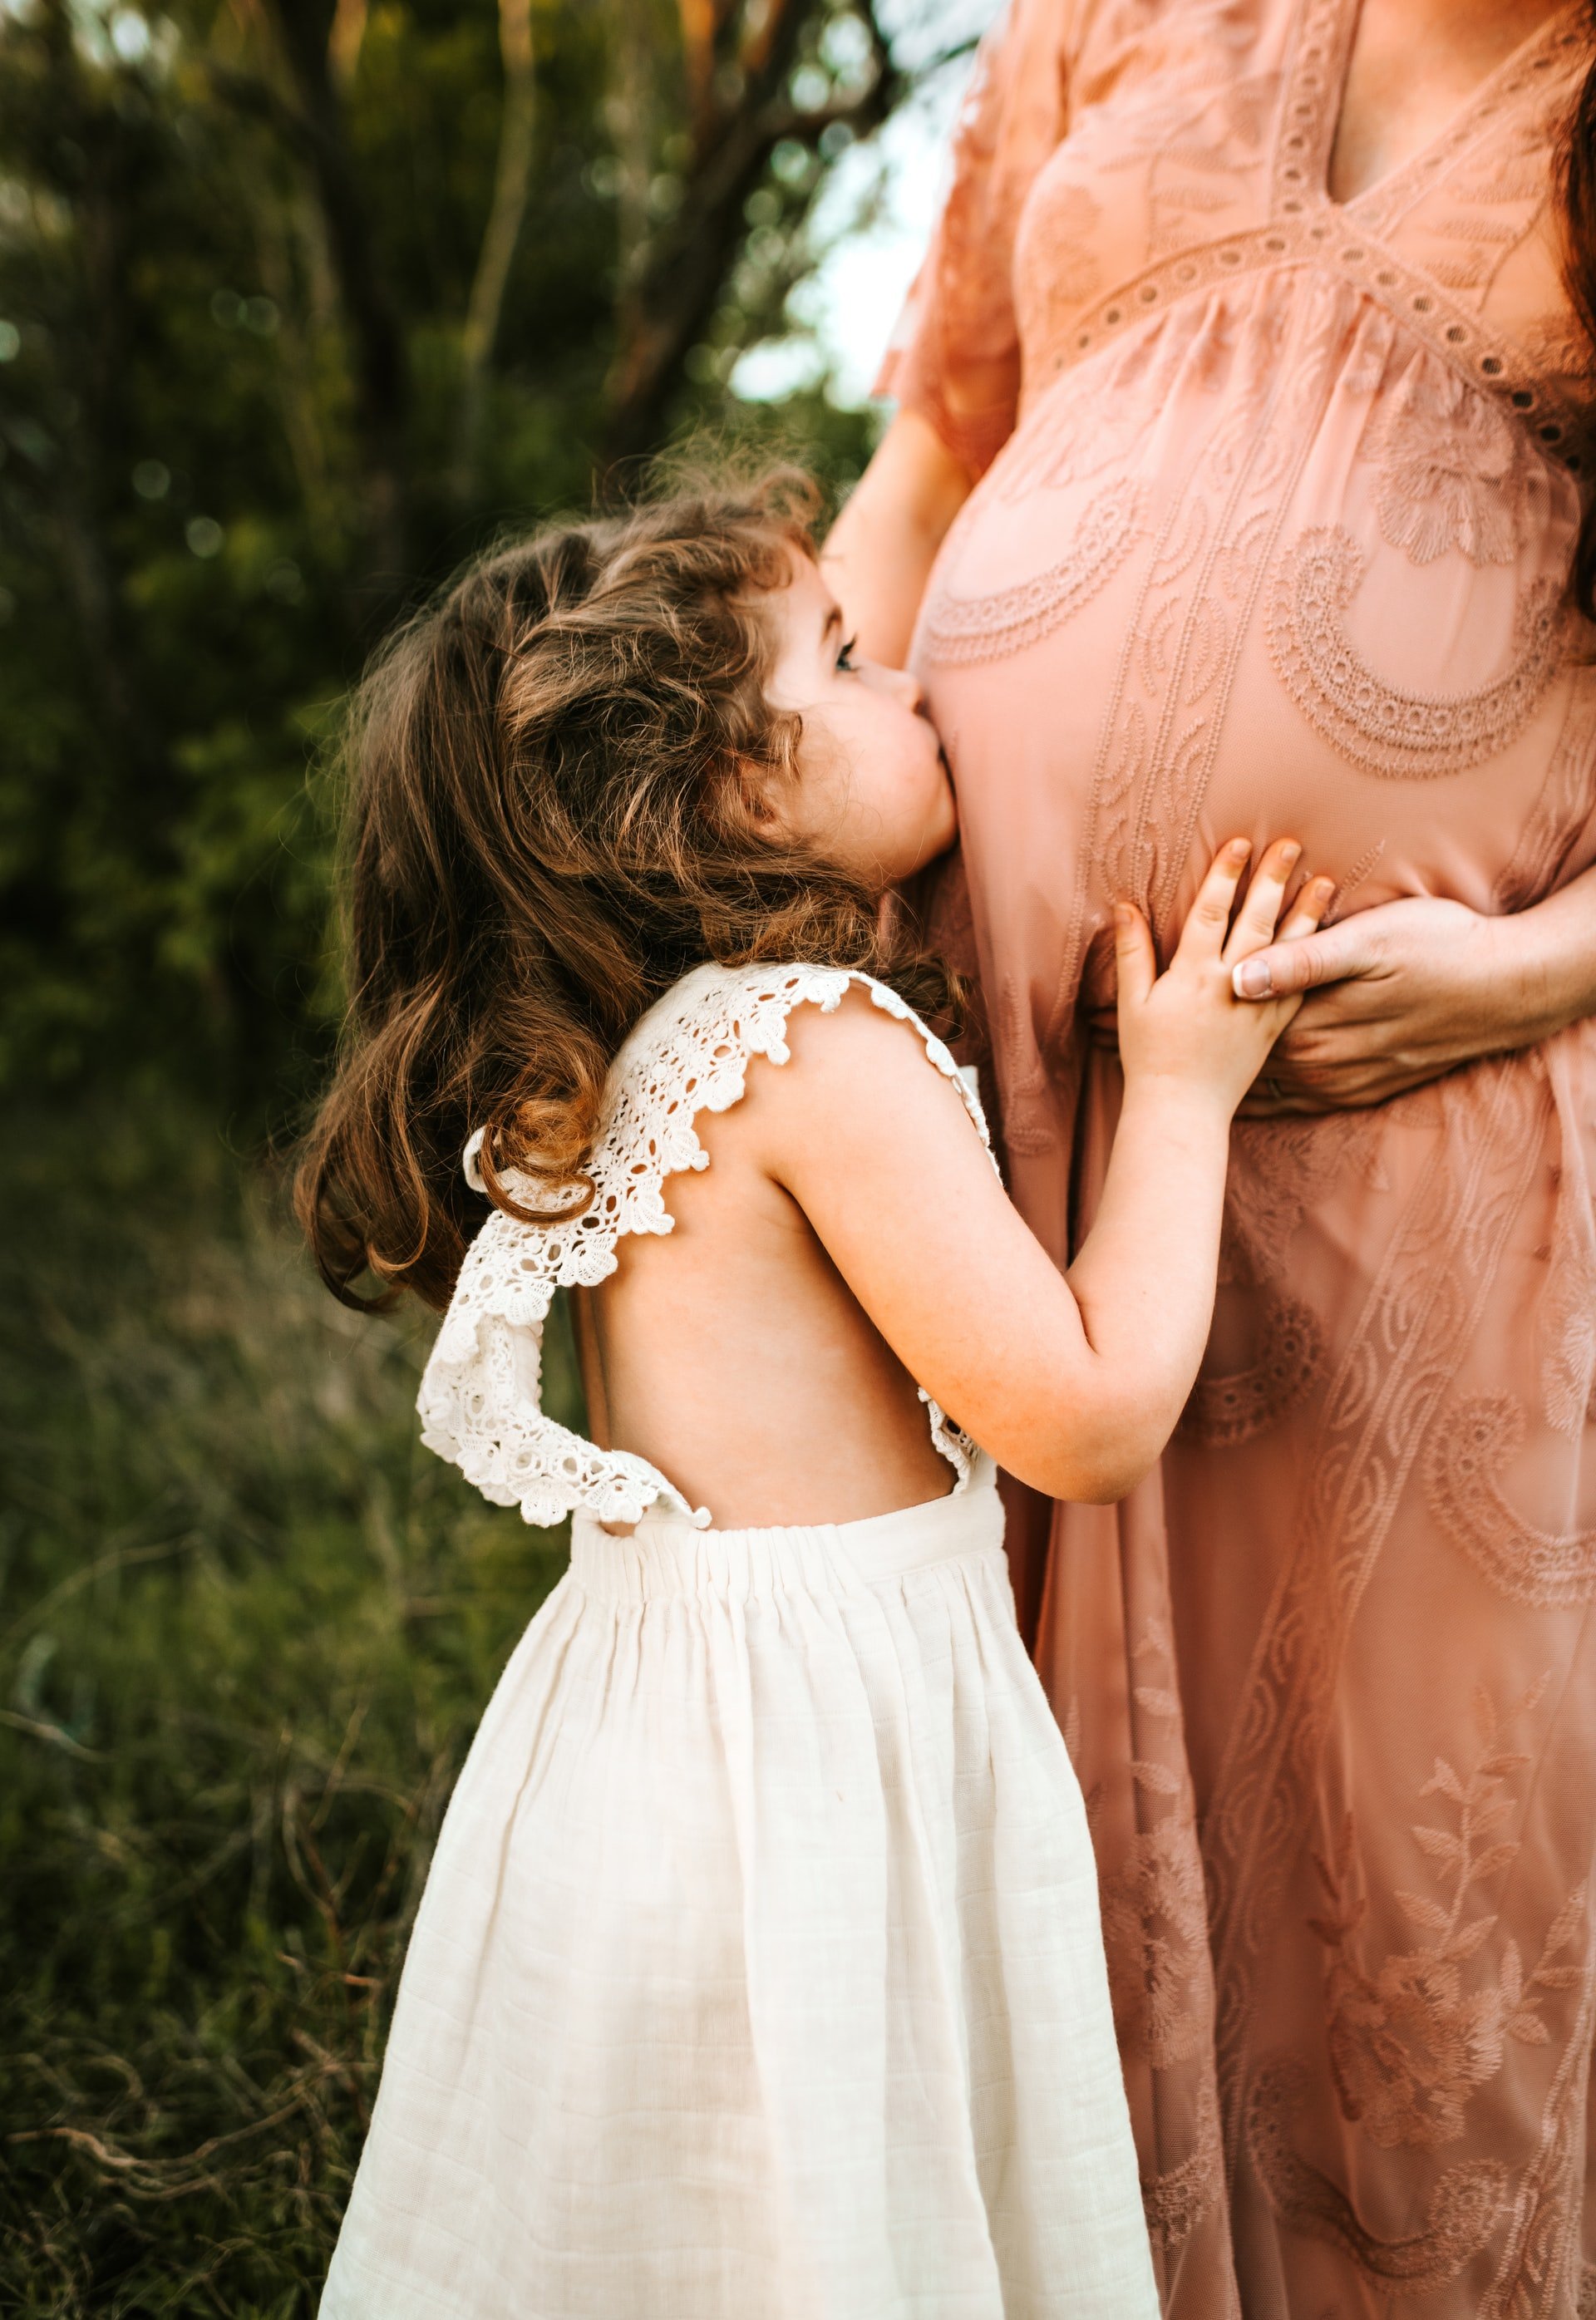 Child kissing pregnant woman's belly | Source: Unsplash